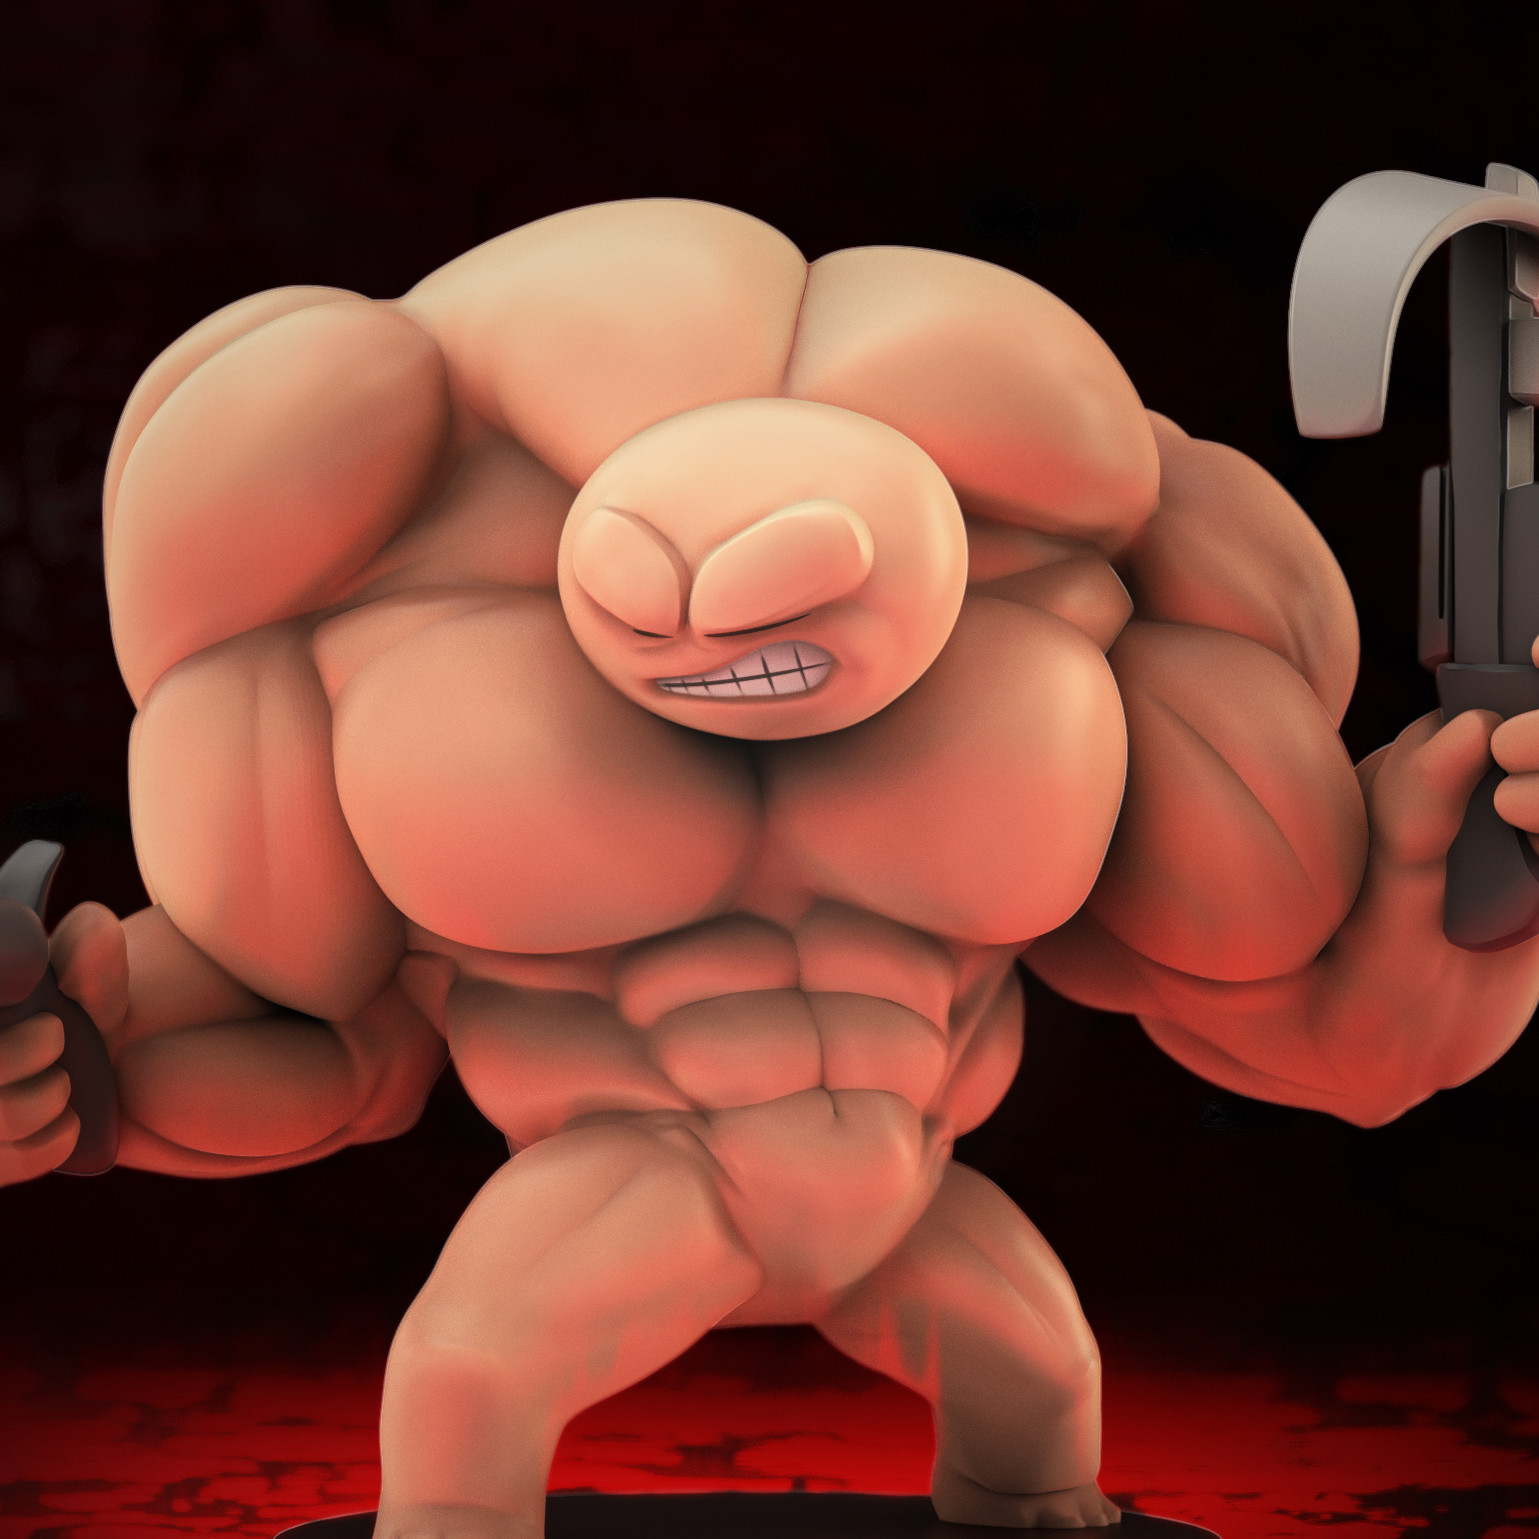 Steroids collectible from the game Nuclear Throne Design by Paul Veer Produ...